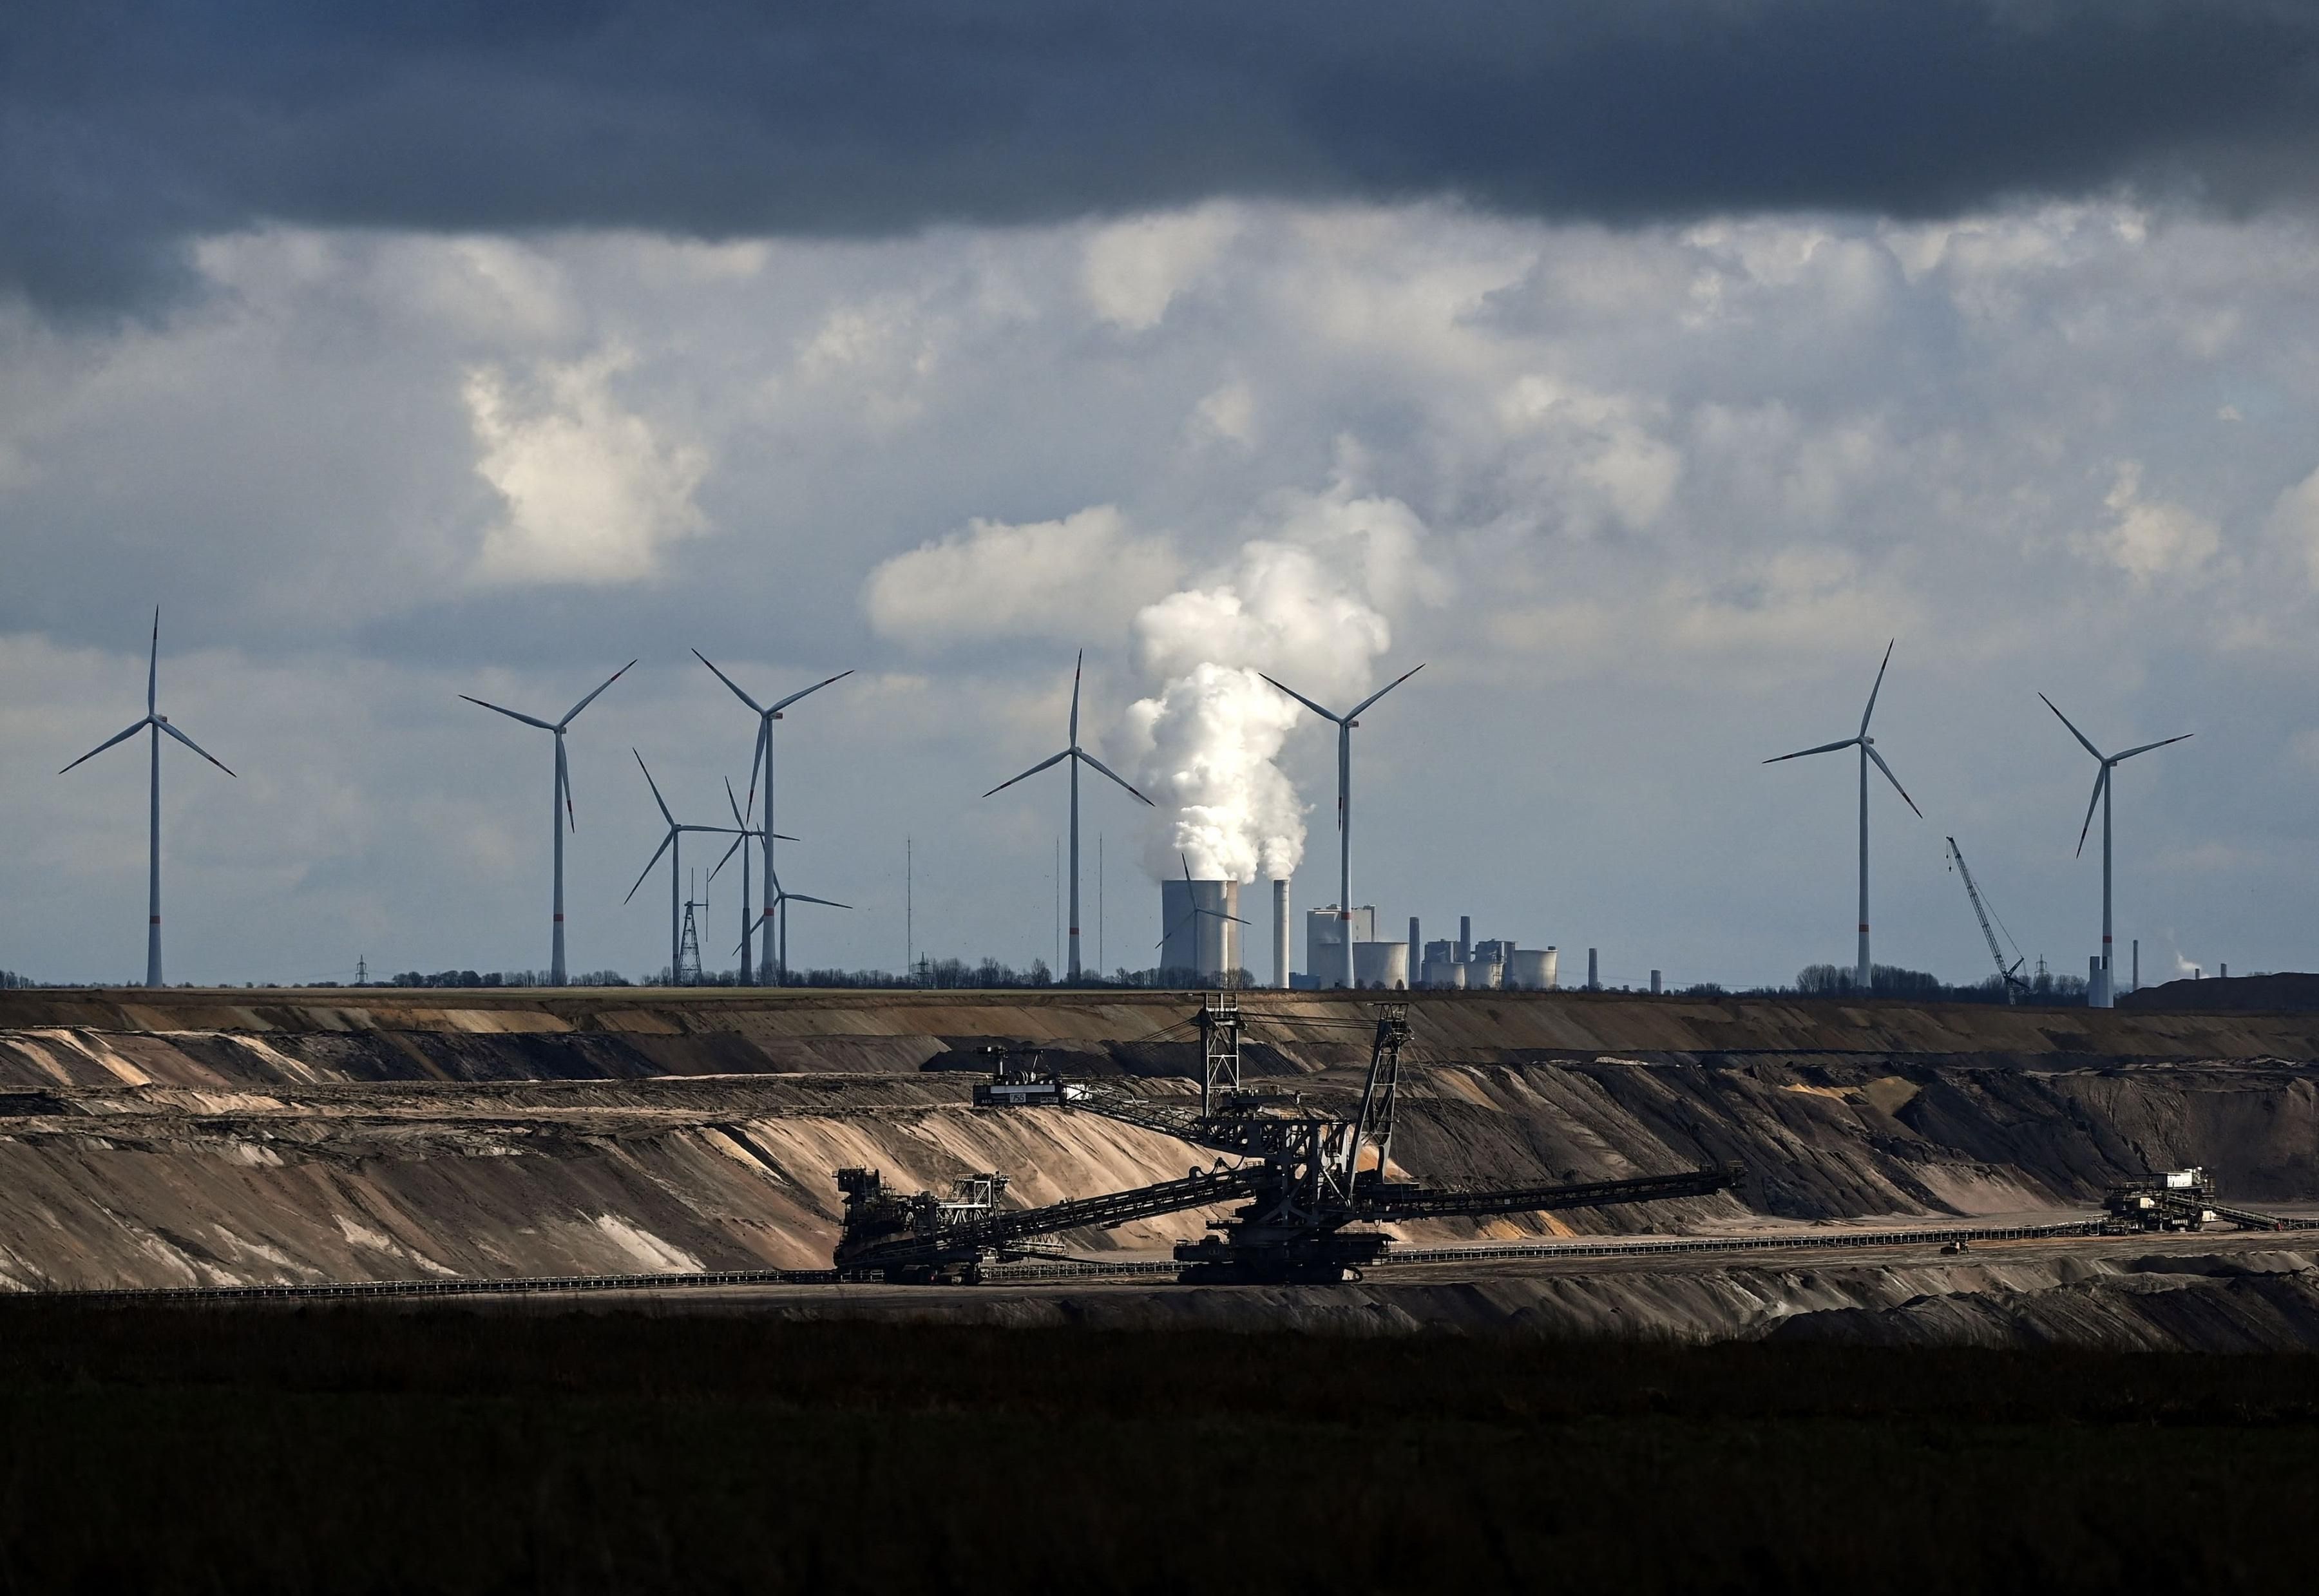 In Garzweiler, Germany, wind turbines are seen near an open-cast mining operation and a coal-fired power plant run by German energy giant RWE on March 15, 2021. (Photo: Ina Fassbender/AFP via Getty Images)